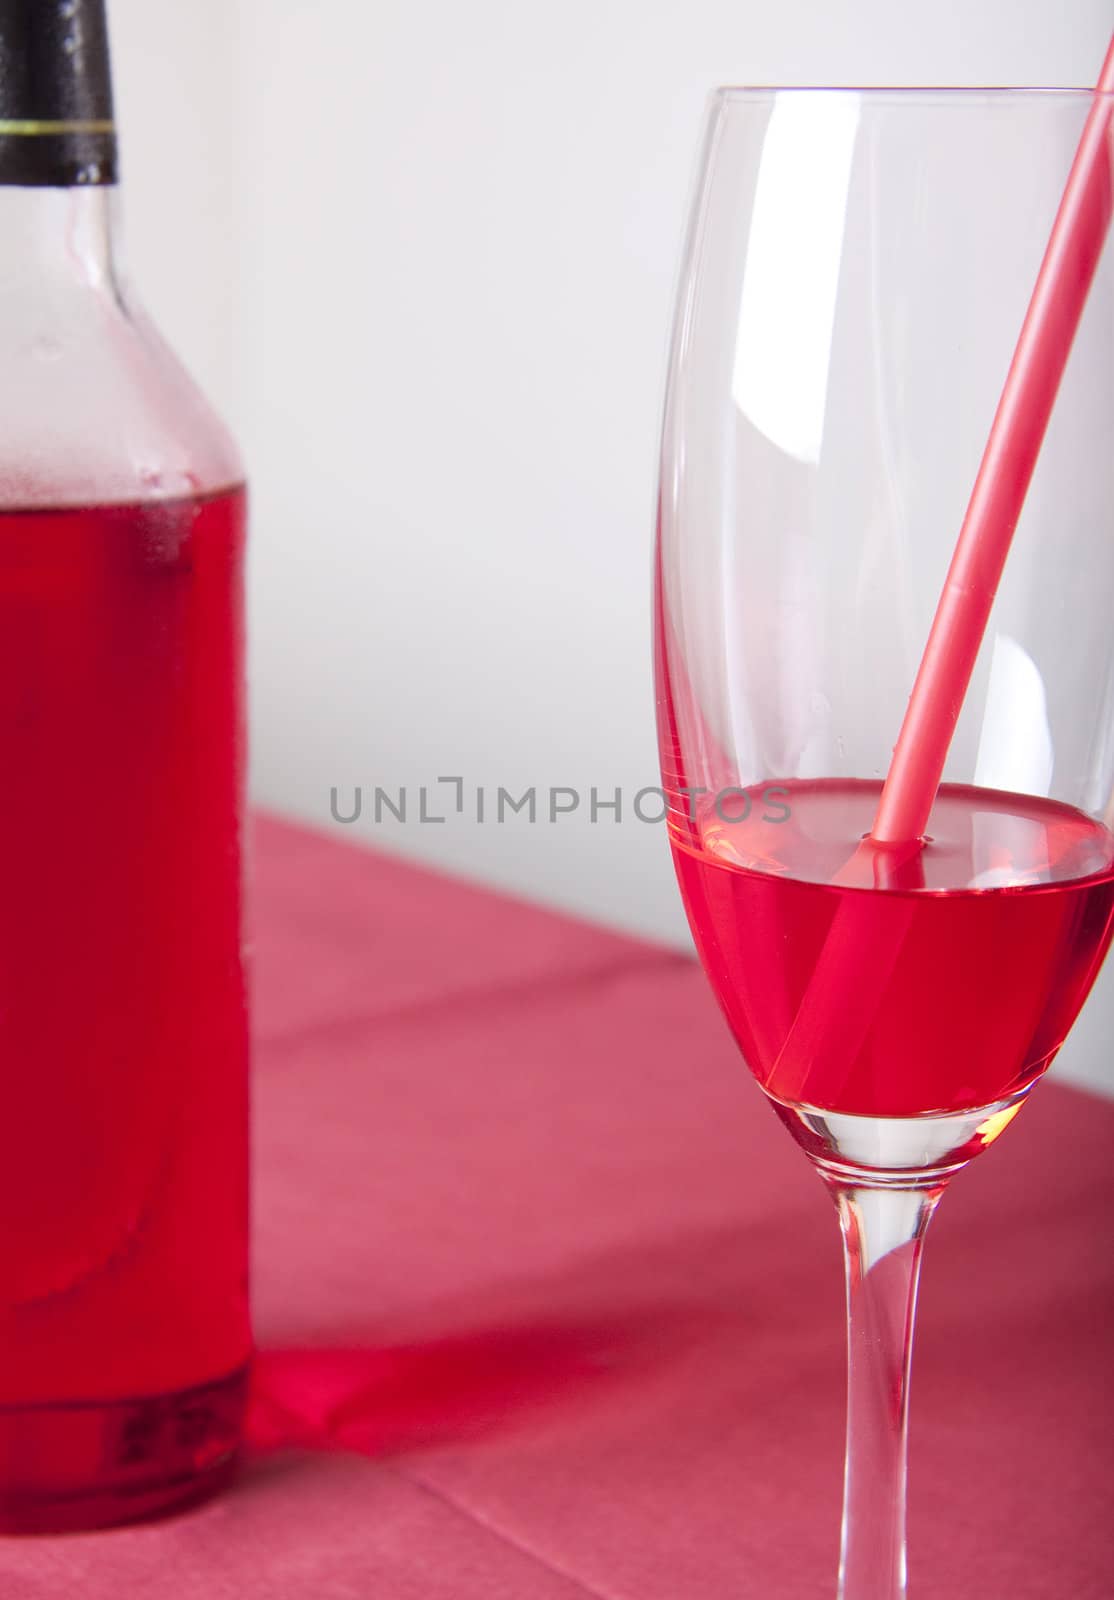 Red cocktail in a glass with a straw and a bottle on a red table